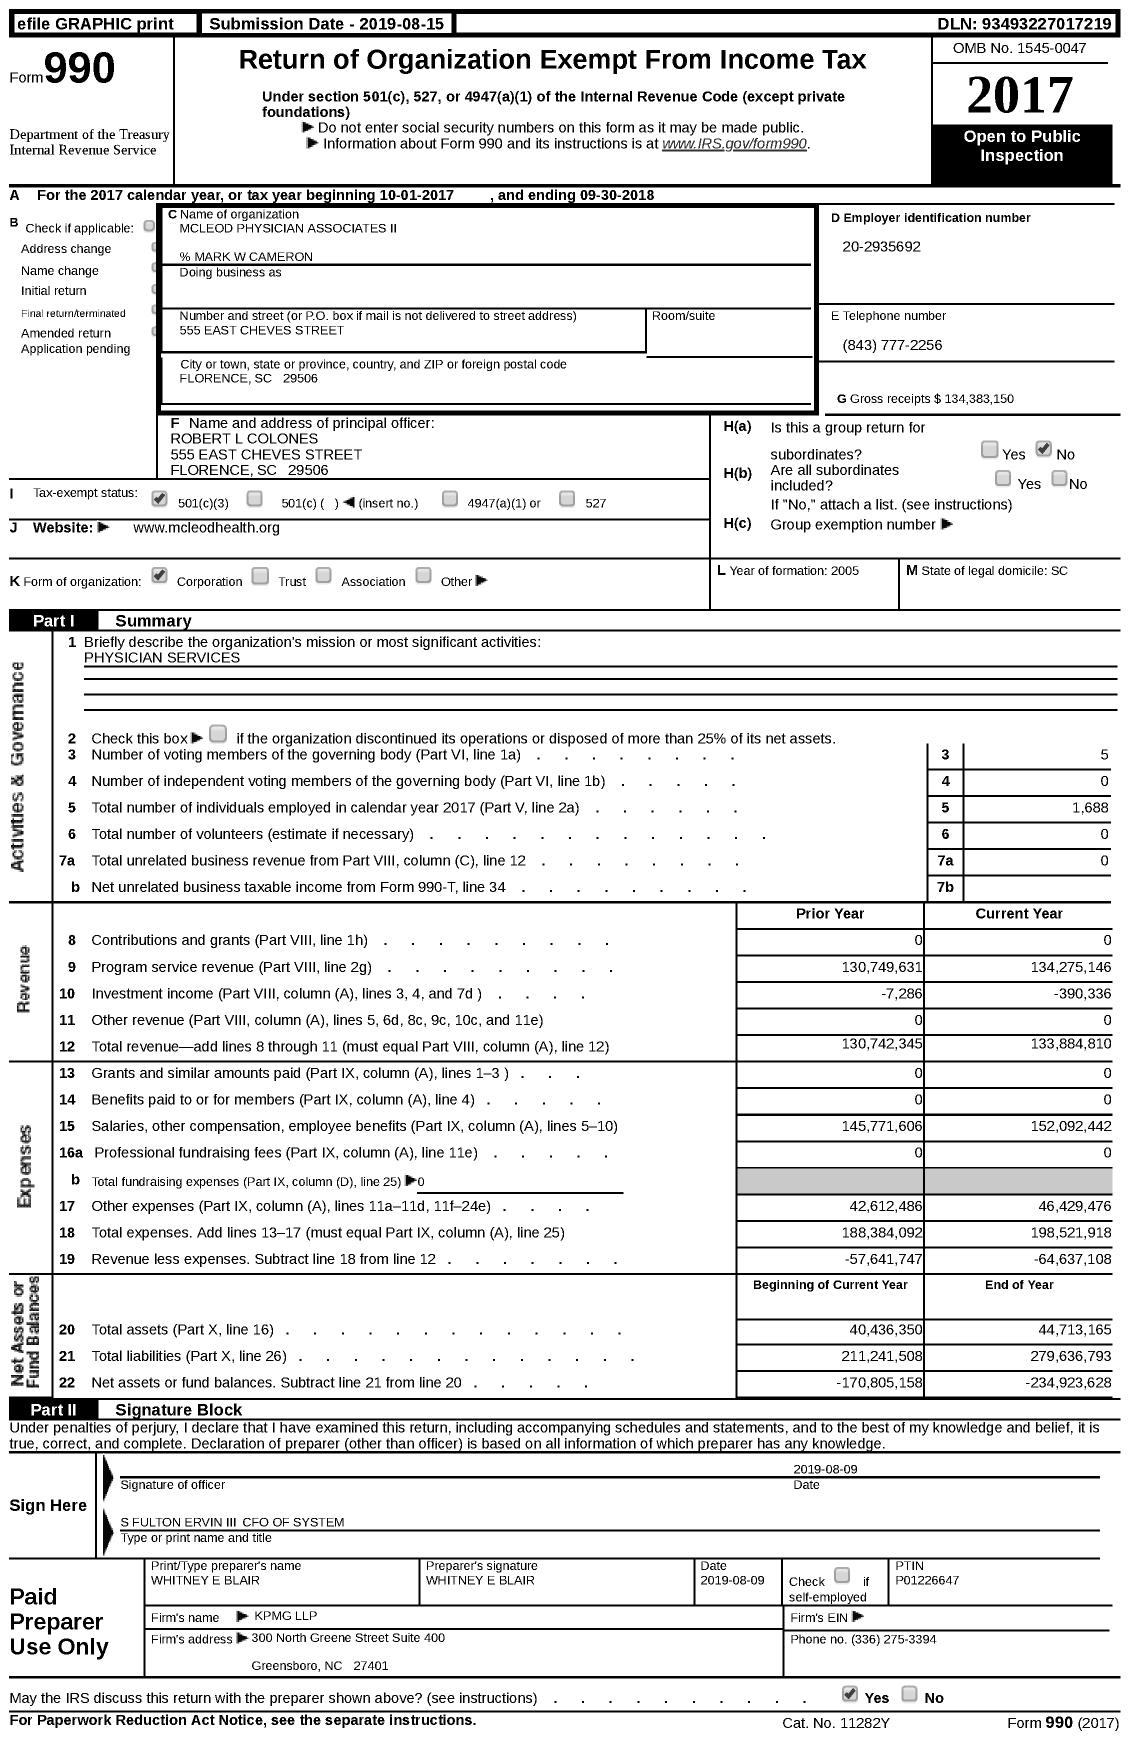 Image of first page of 2017 Form 990 for Mcleod Physician Associates Ii